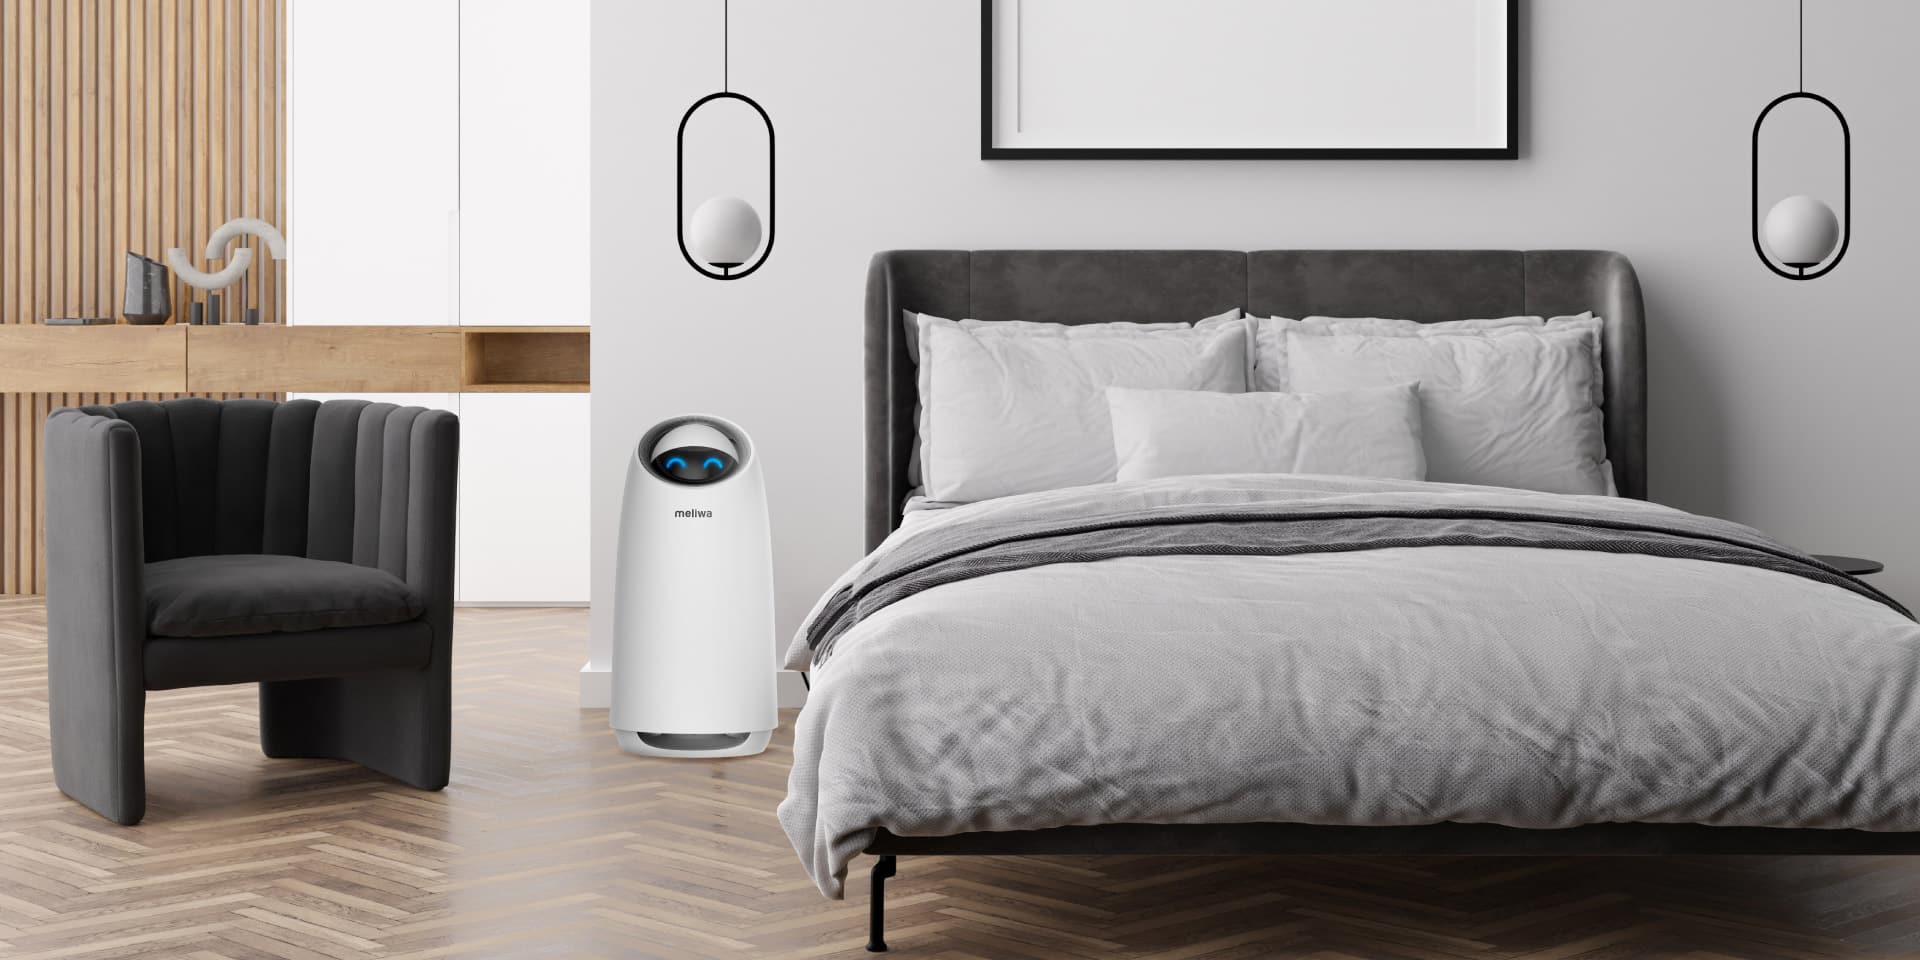 Fine dust air purifier for the bedroom